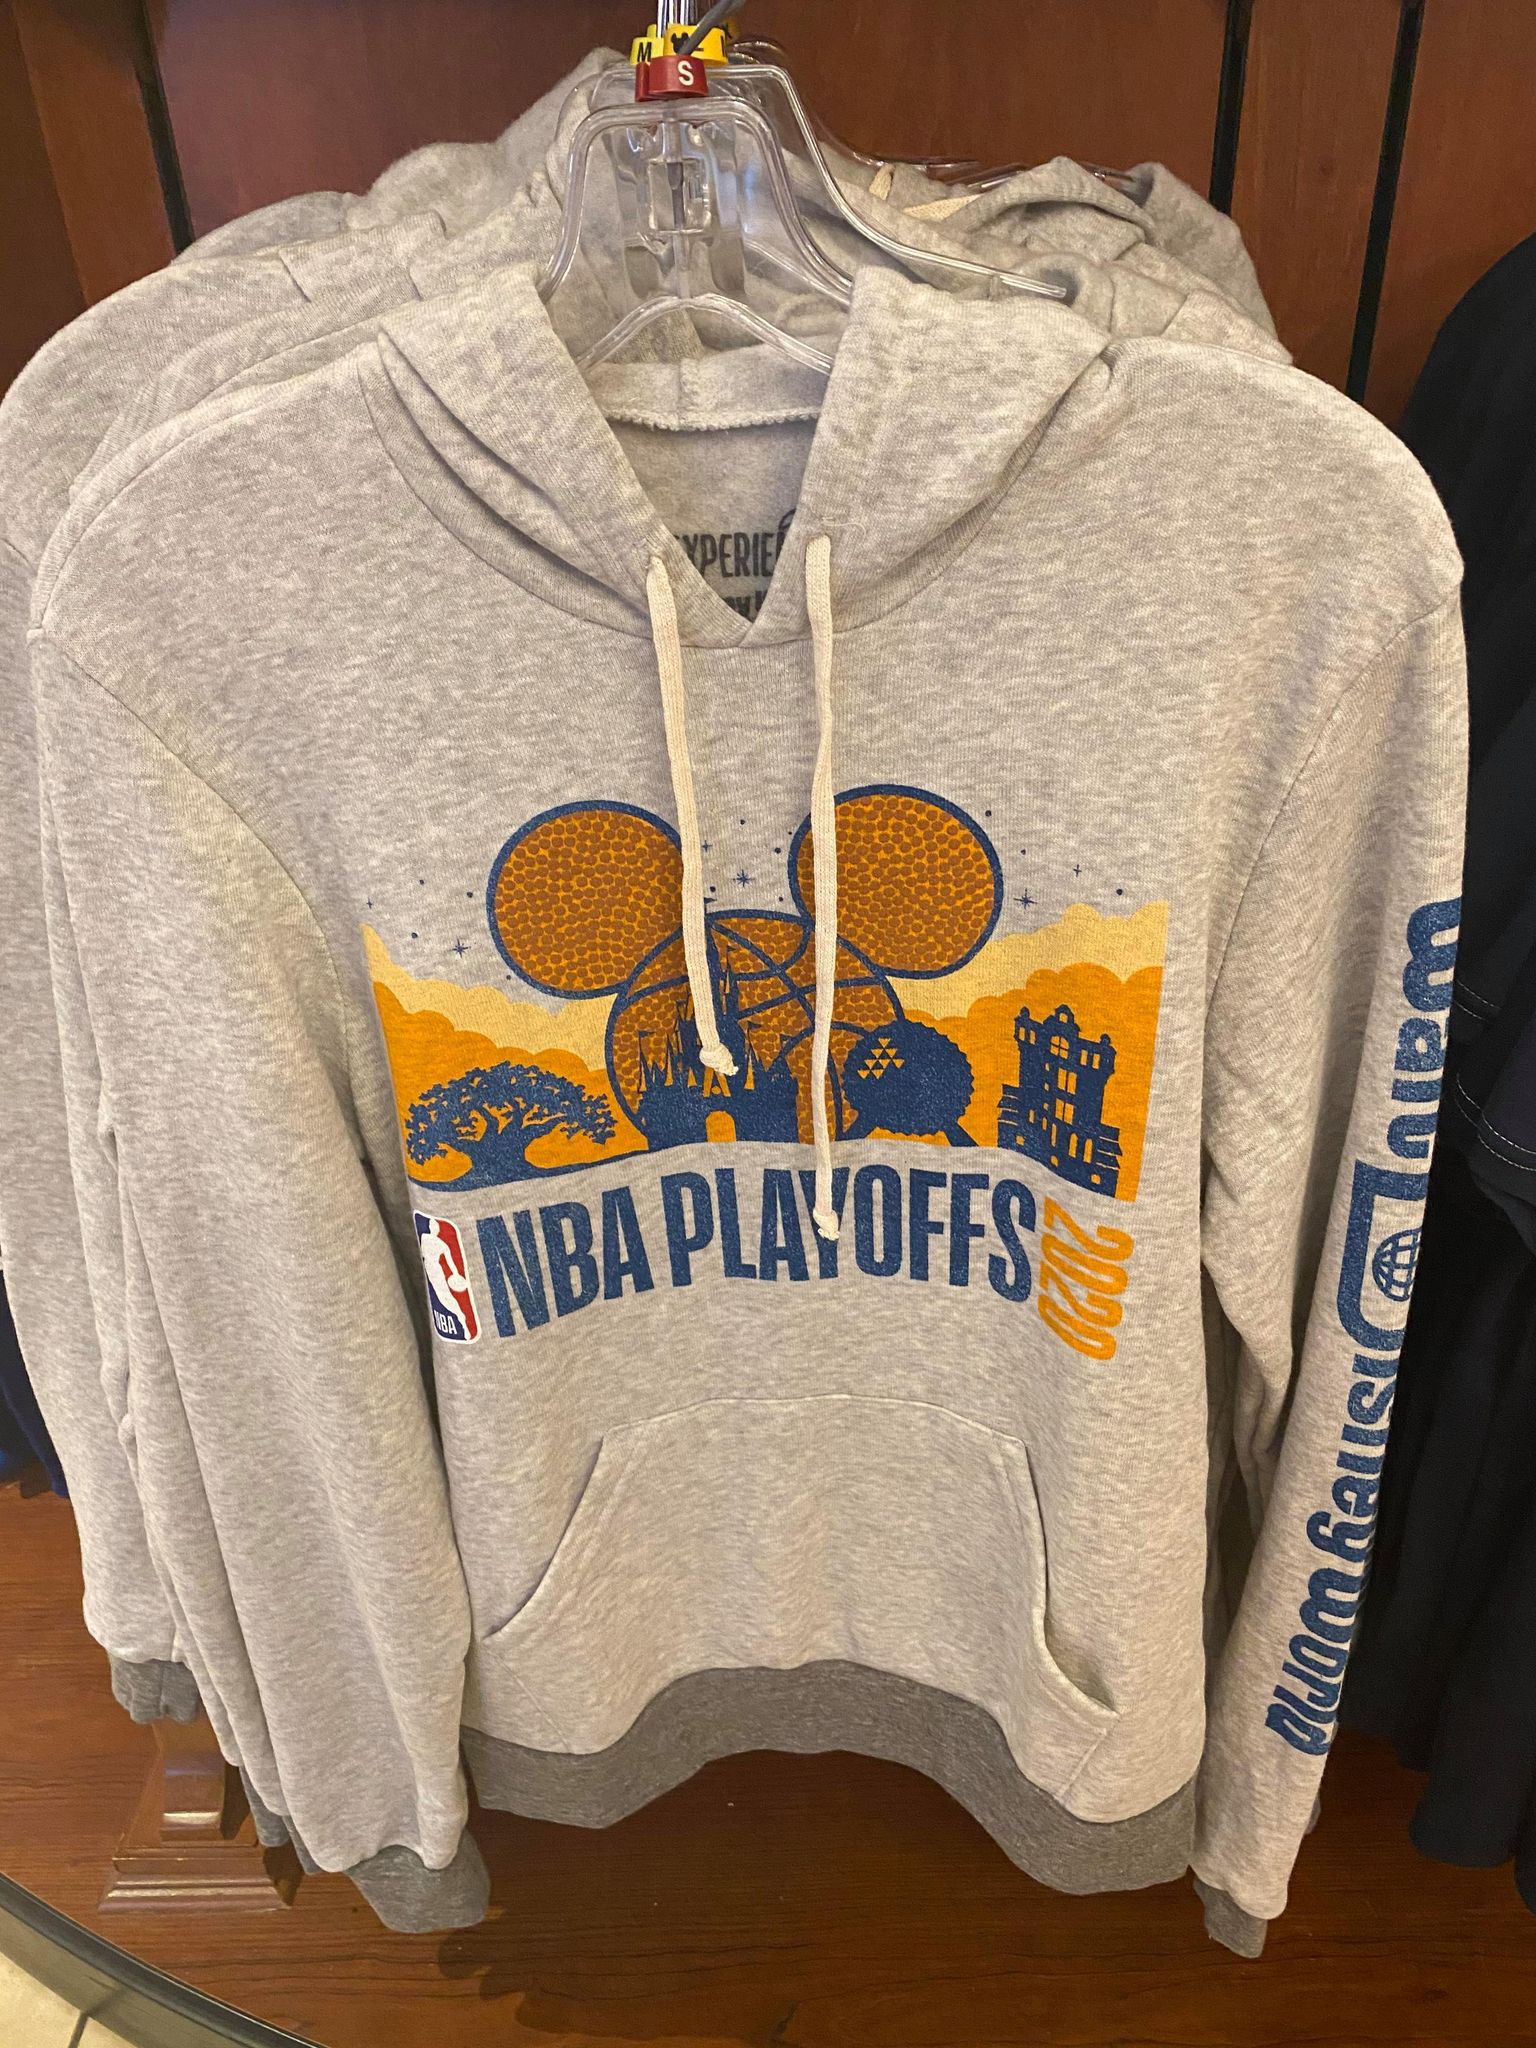 Even More Awesome NBA Merch Hits The Shelves at Disney - MickeyBlog.com